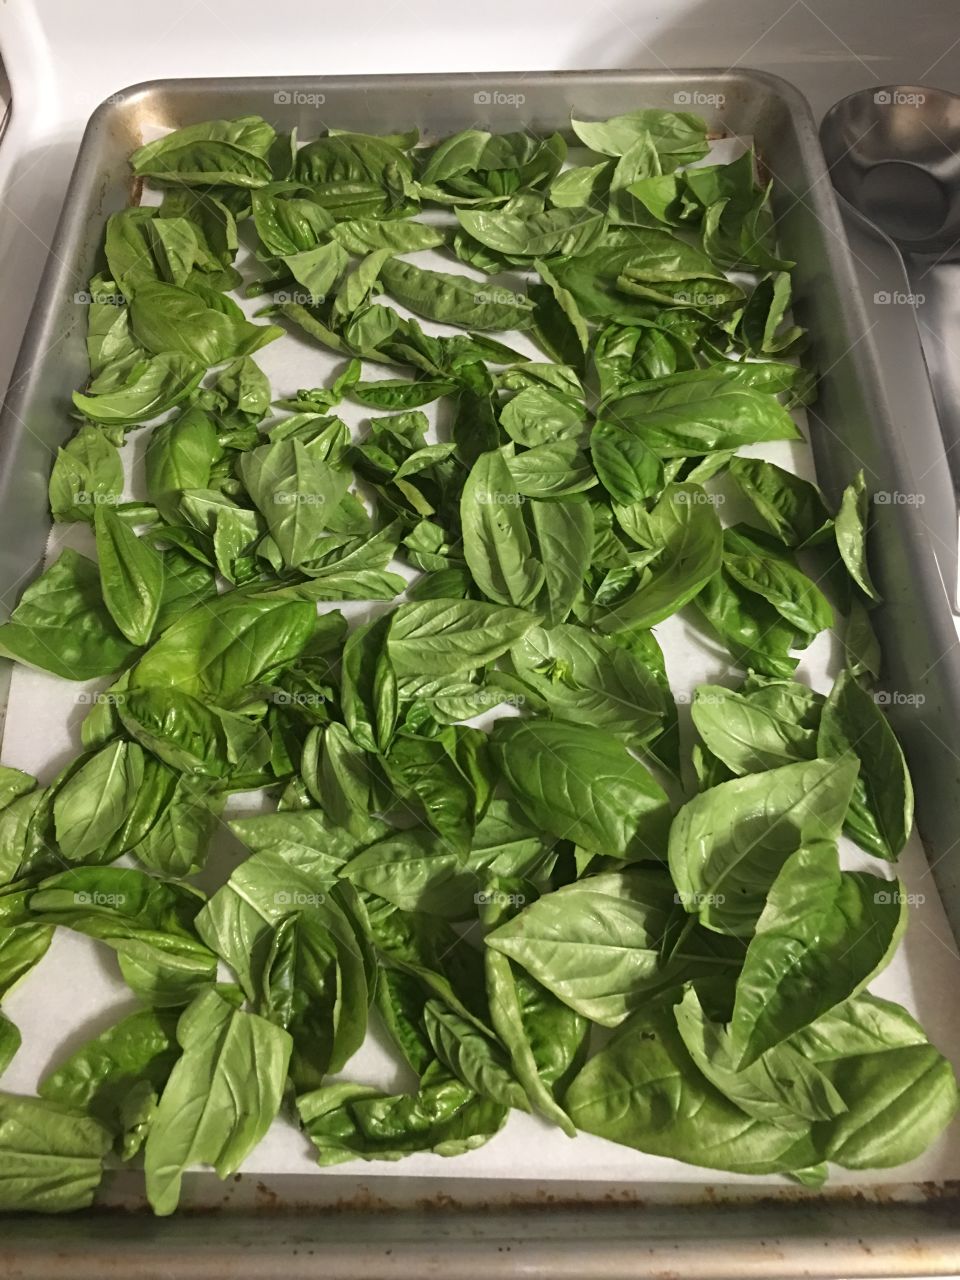 Pan of basil herb to be dried